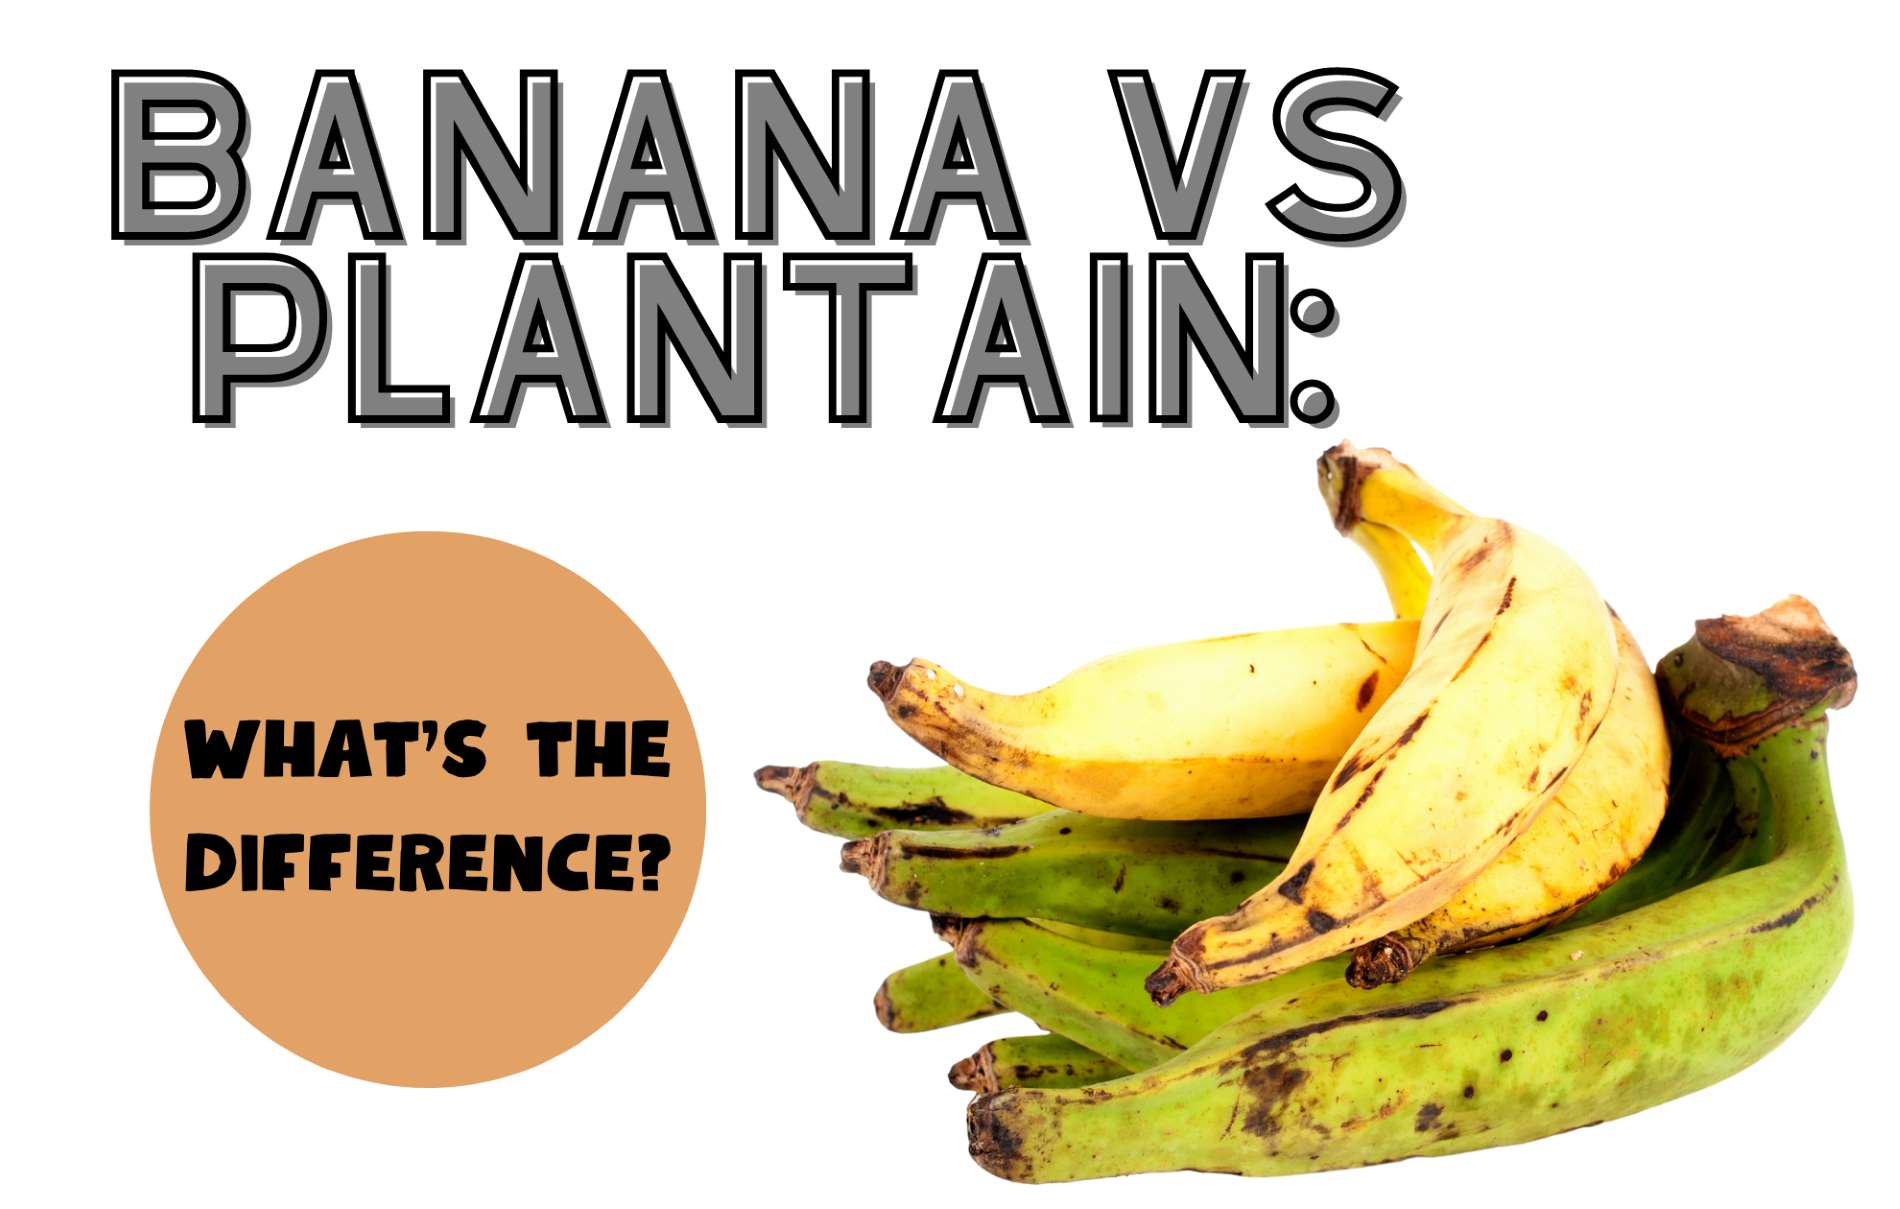 Banana vs Plantains: What’s the Difference?